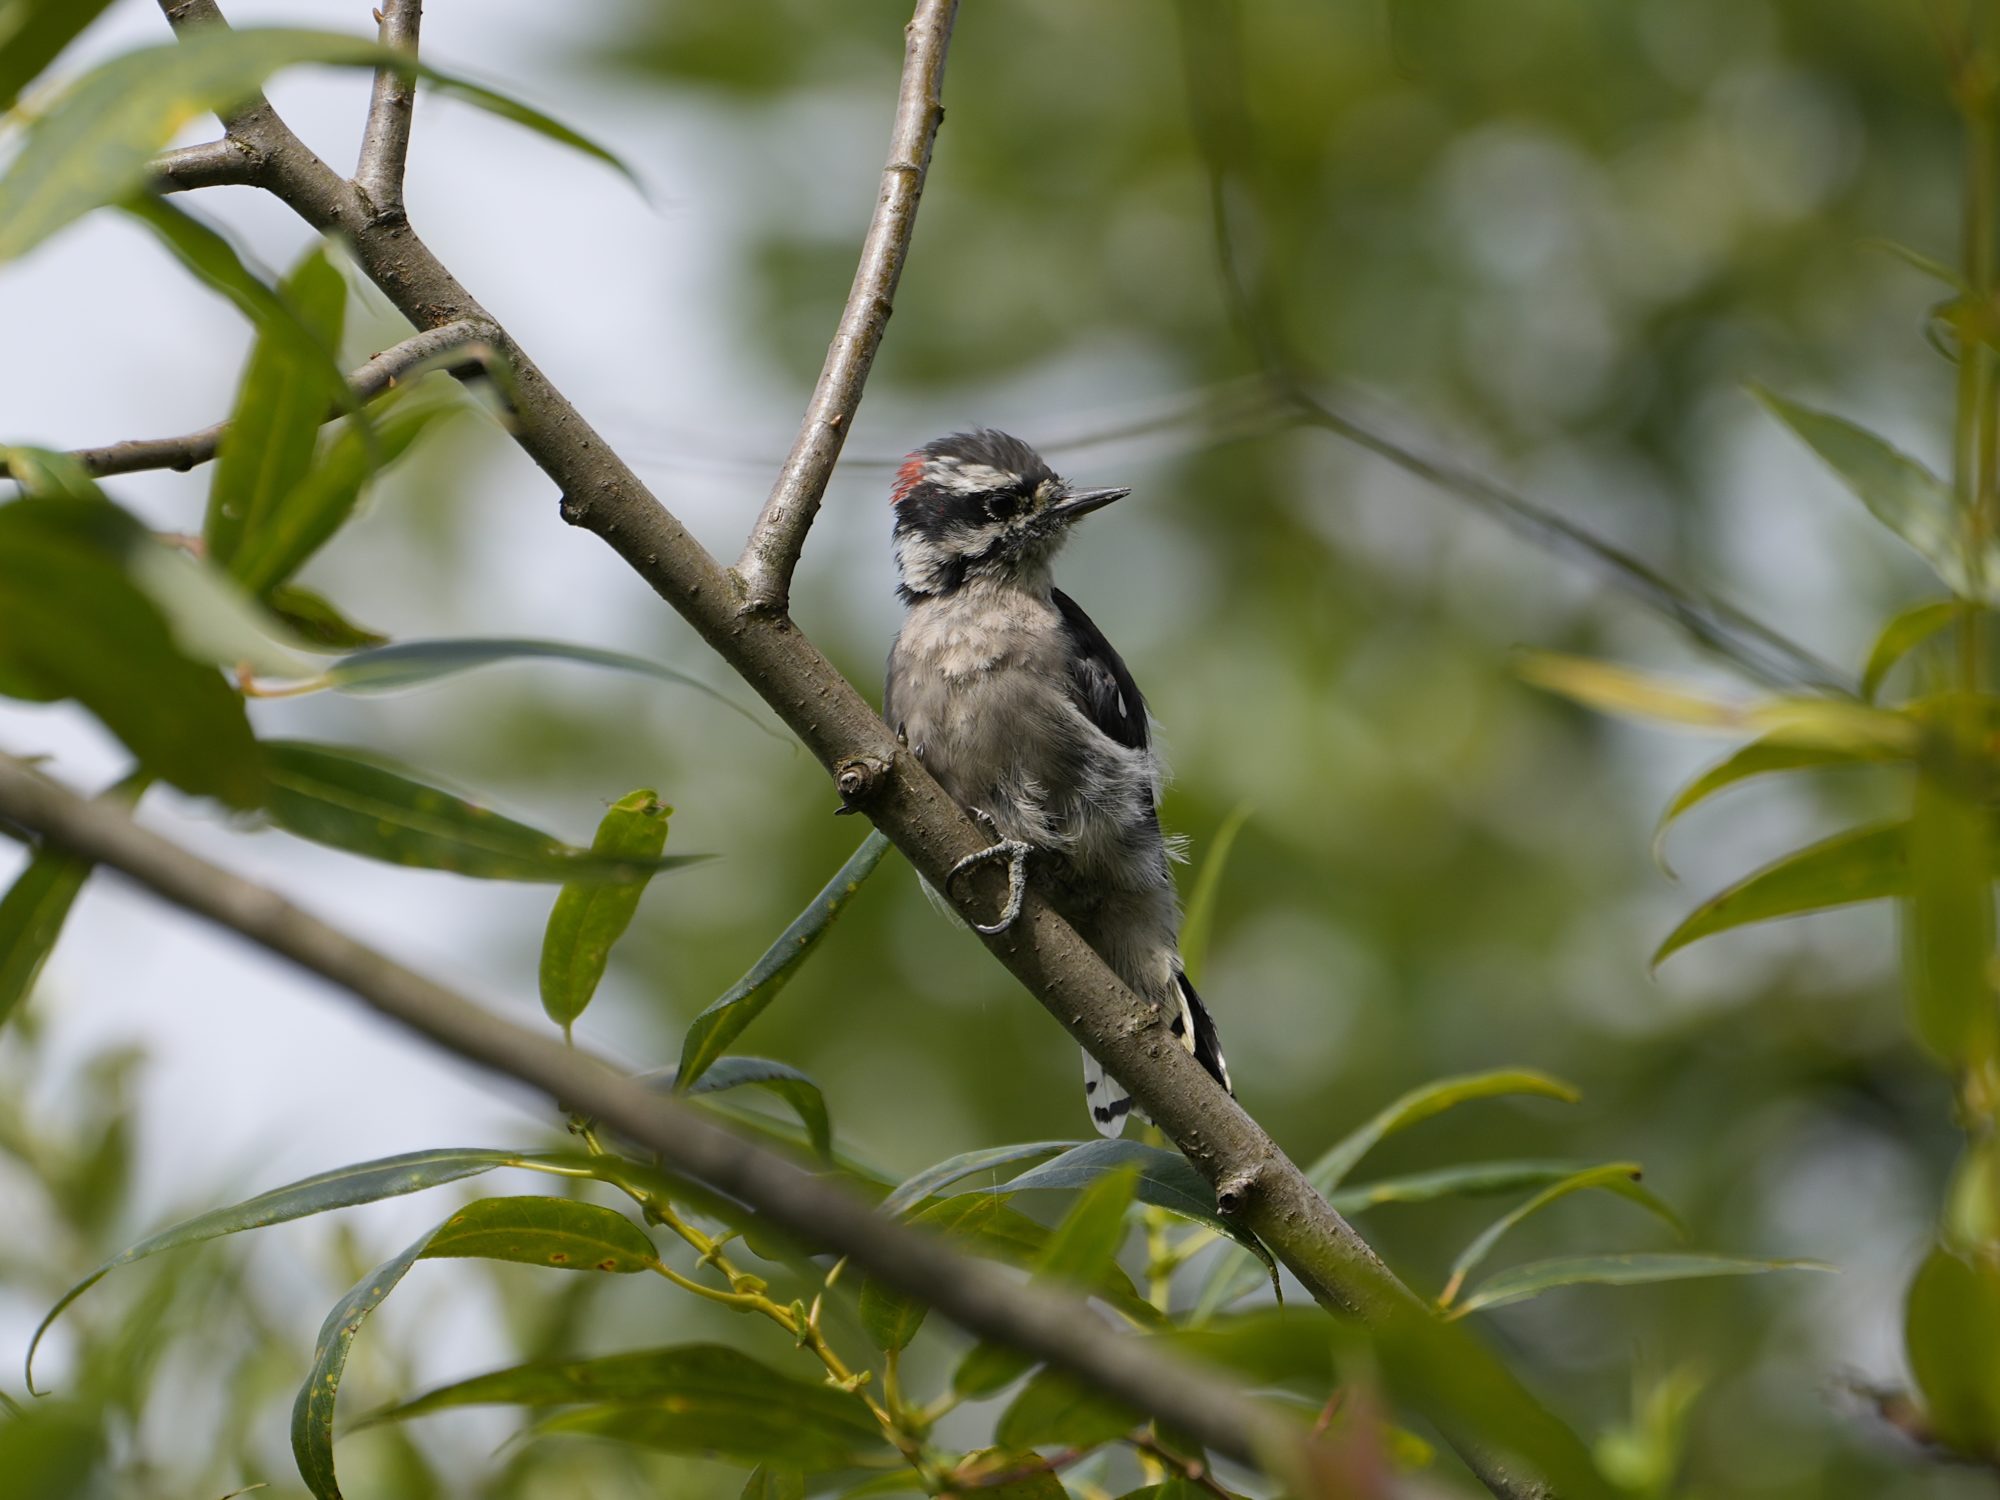 A Downy Woodpecker, male and probably immature since it looks pretty scruffy, is sitting on a branch looking away